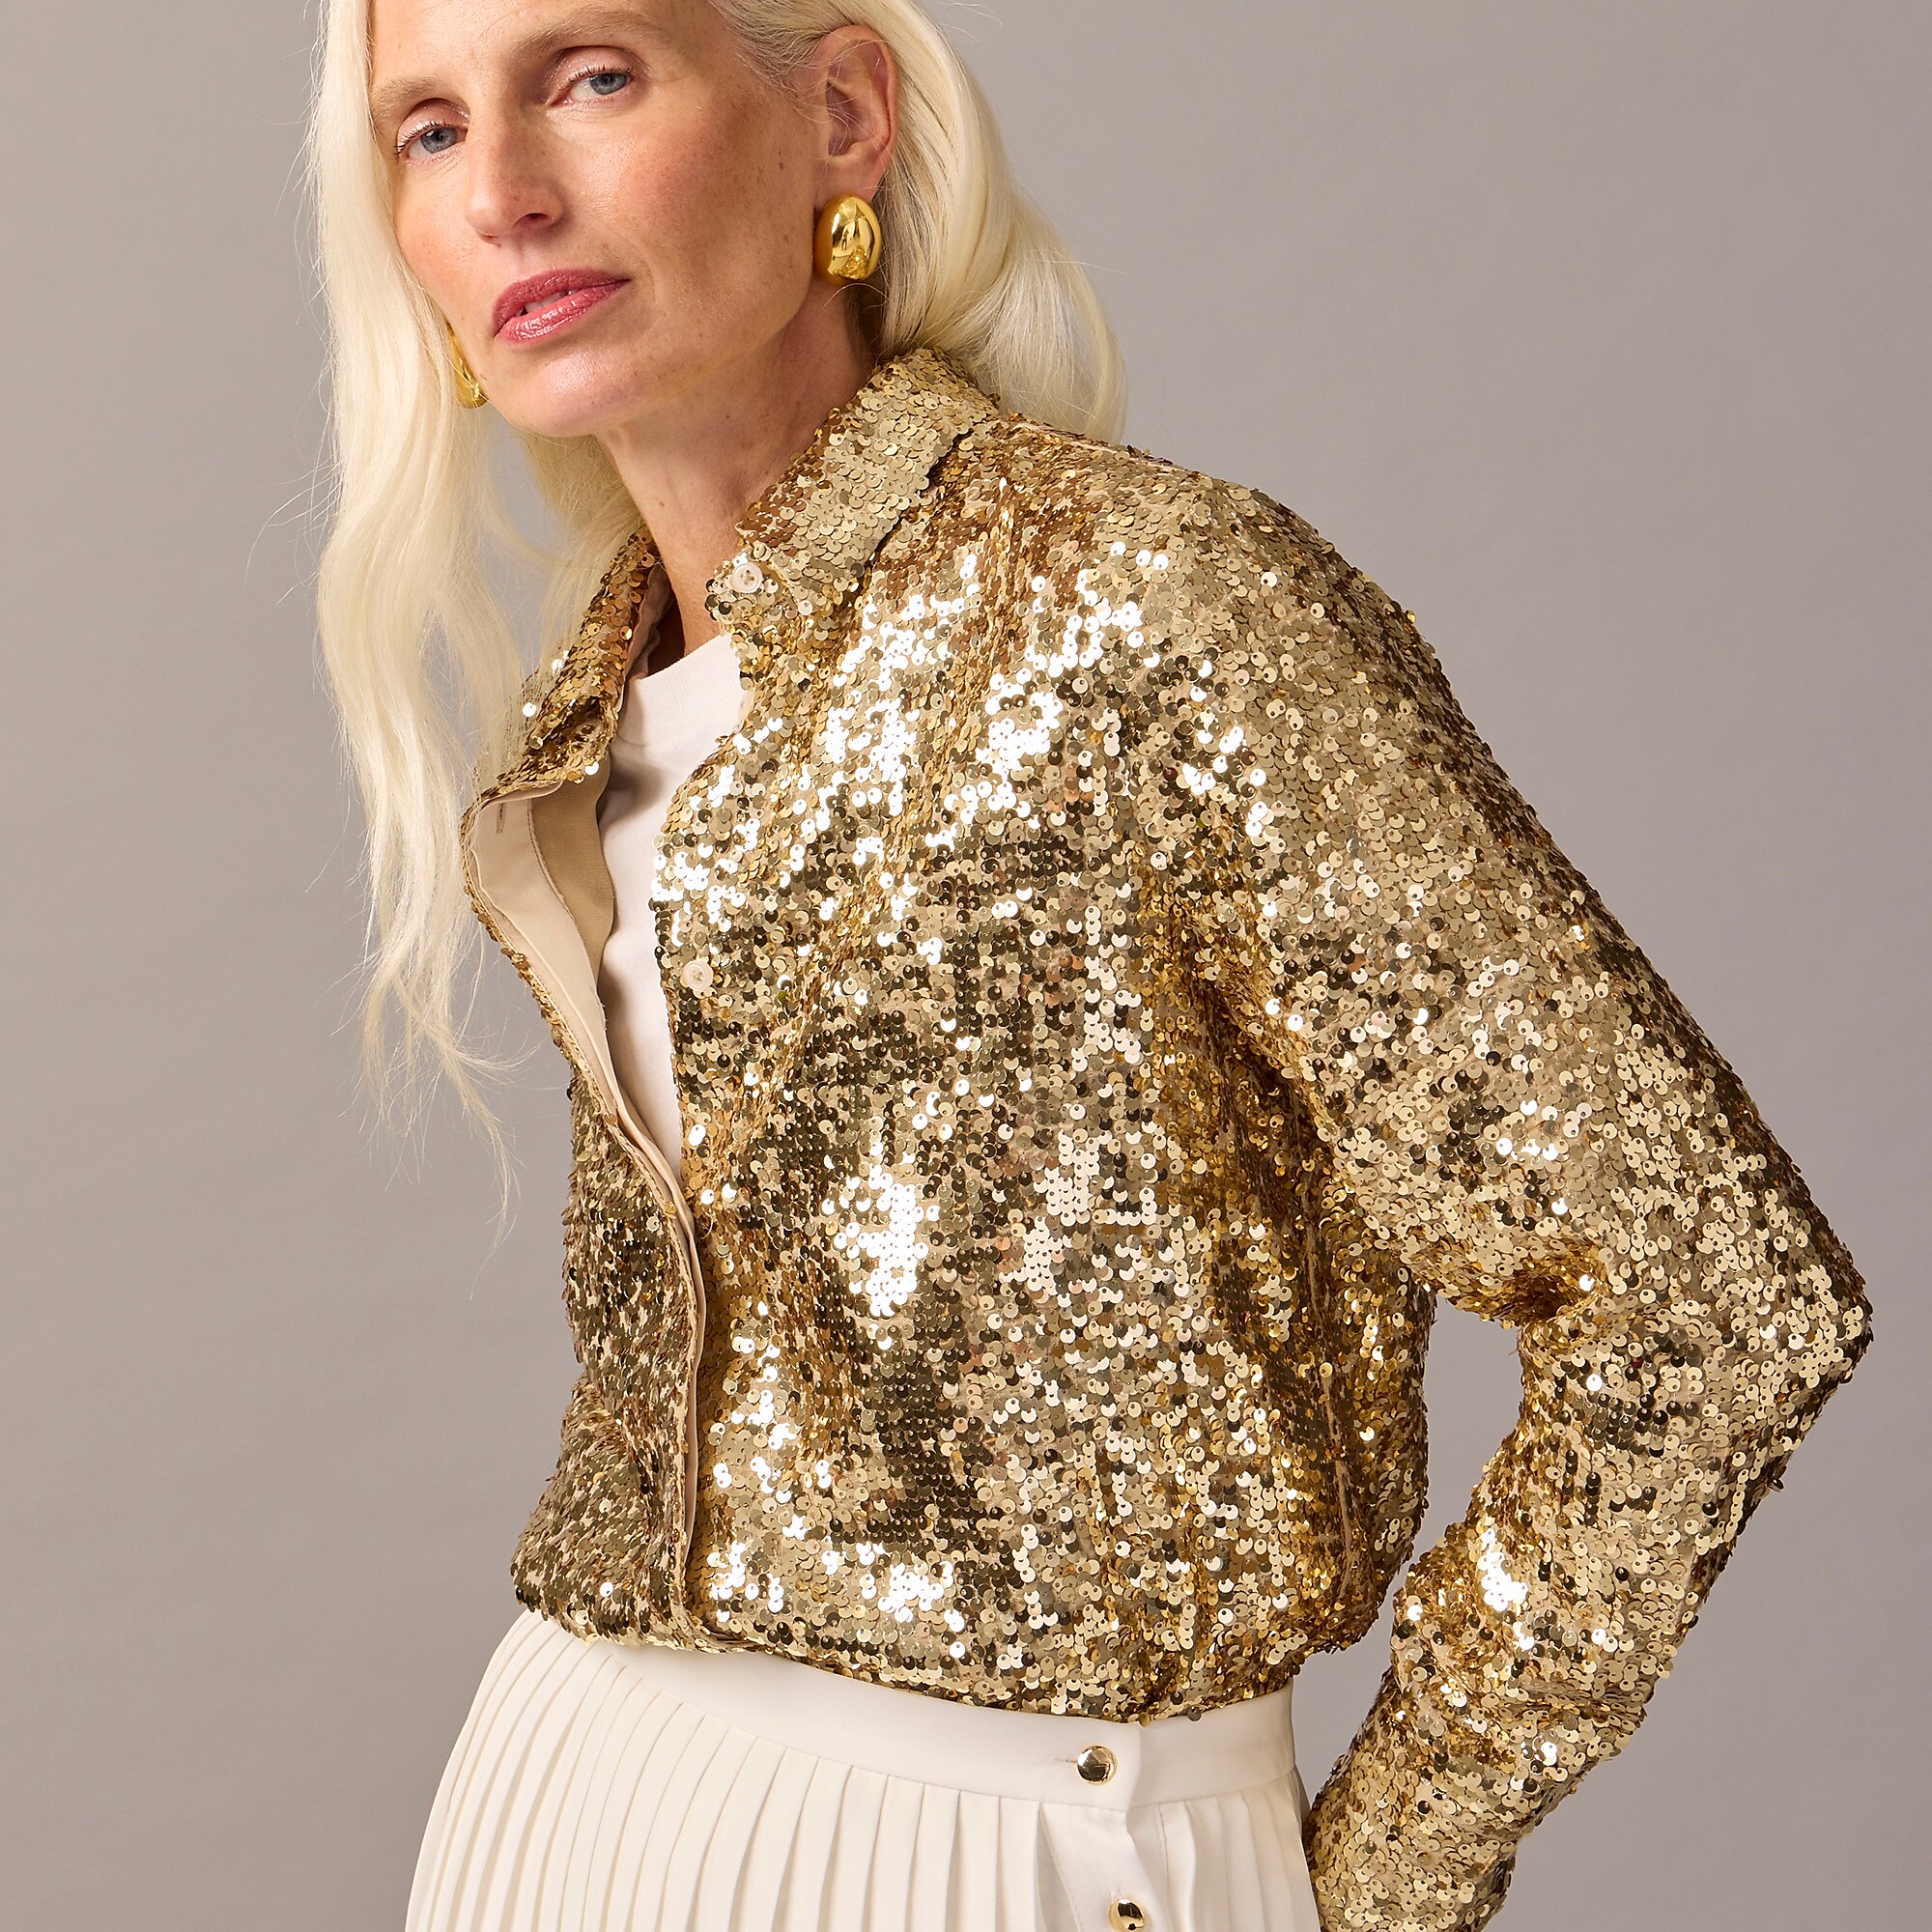 How to Wear a Sequin Top or Topper for Fall & Winter Evenings